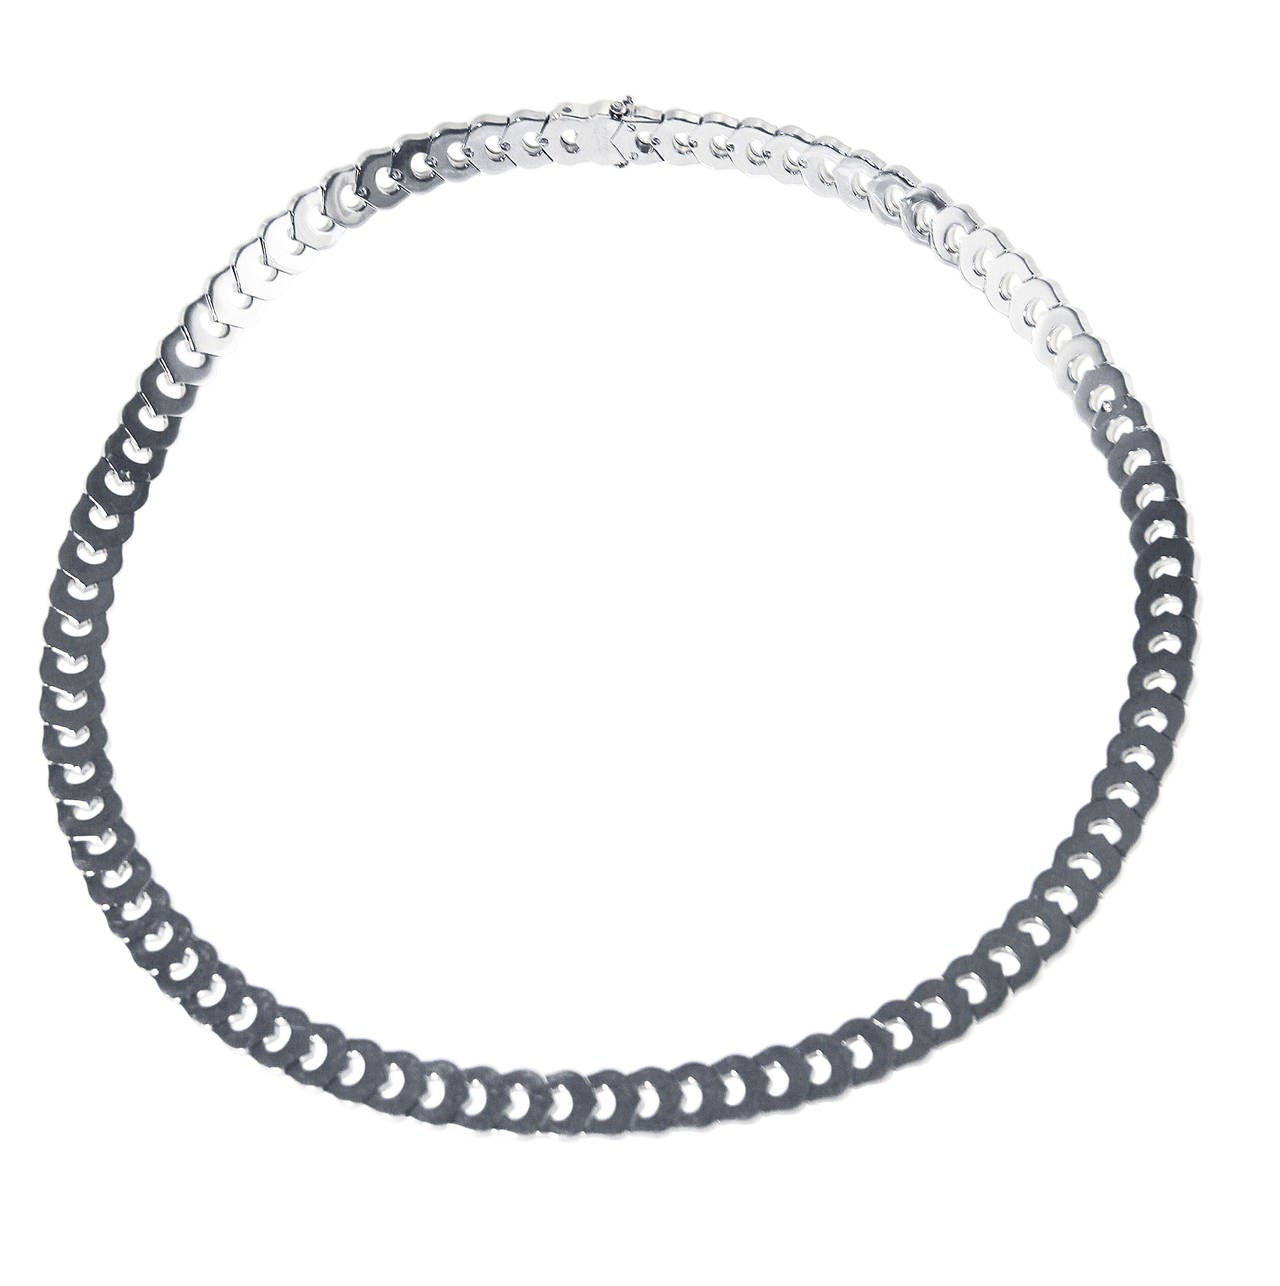 An 18 karat white gold 'C' necklace by Cartier, France, designed as repeating links of white gold C's, length 16 inches, width 3/8 inch, gross weight 89.9 grams, signed Cartier, numbered 881189, stamped 750, French assay and workshop marks. 